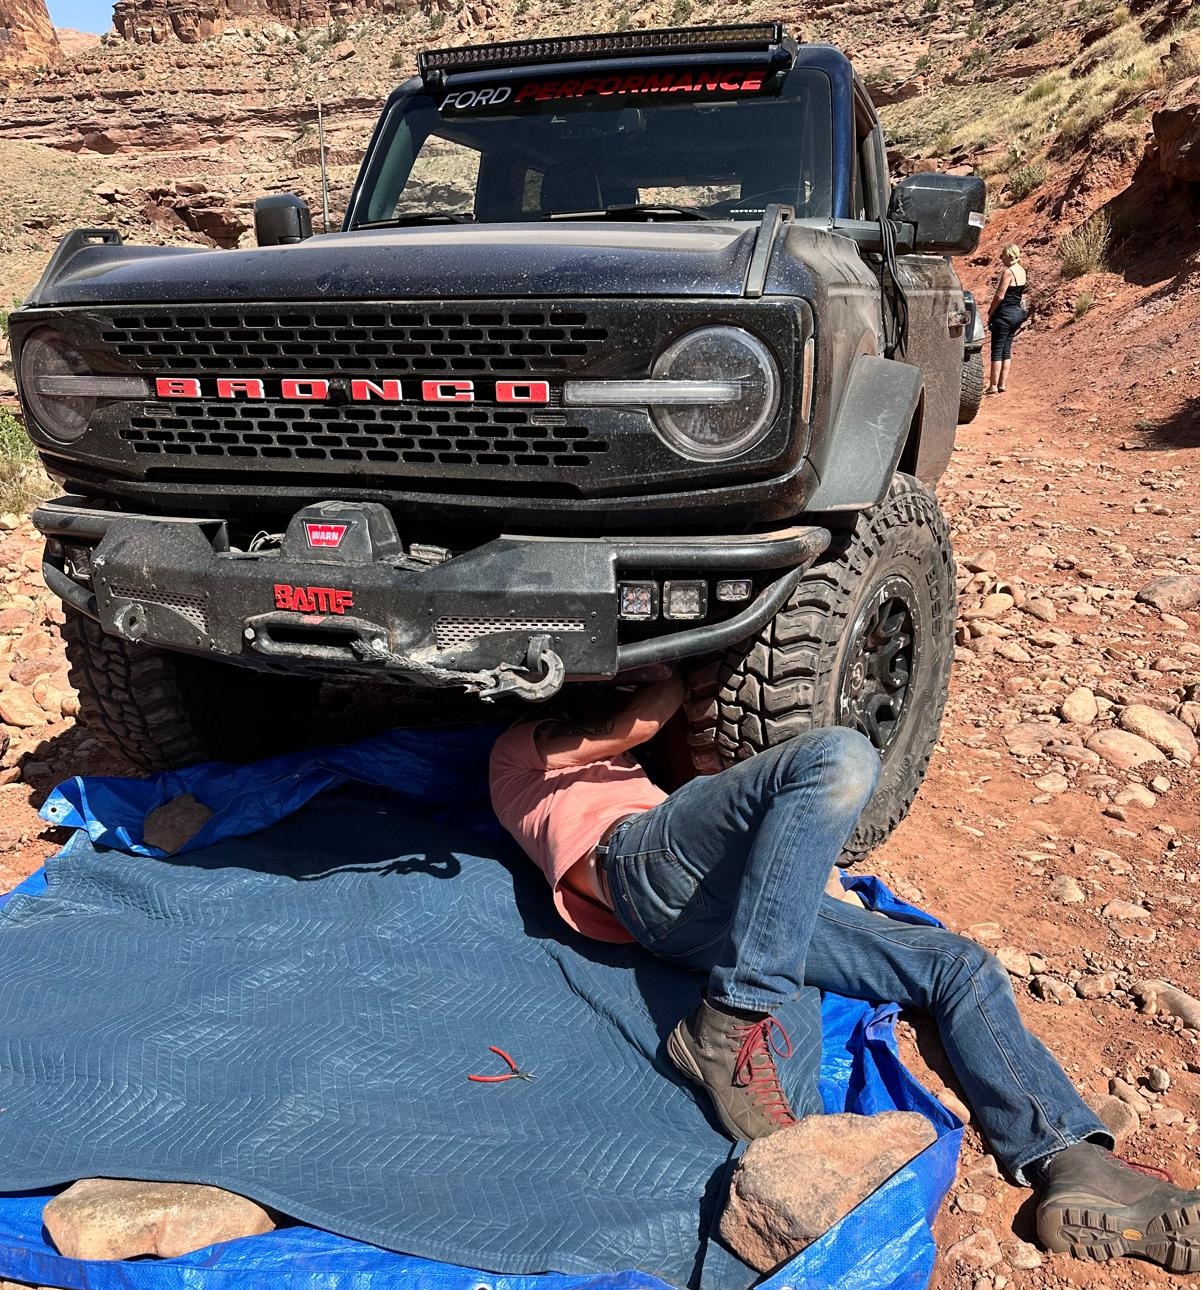 Ford Bronco 2-Door Bronco Sasquatch Trip to Cliff Hanger @ Moab. Tie-Rod Broken, Fixed, Finished Trail IMG-20240503-WA0019